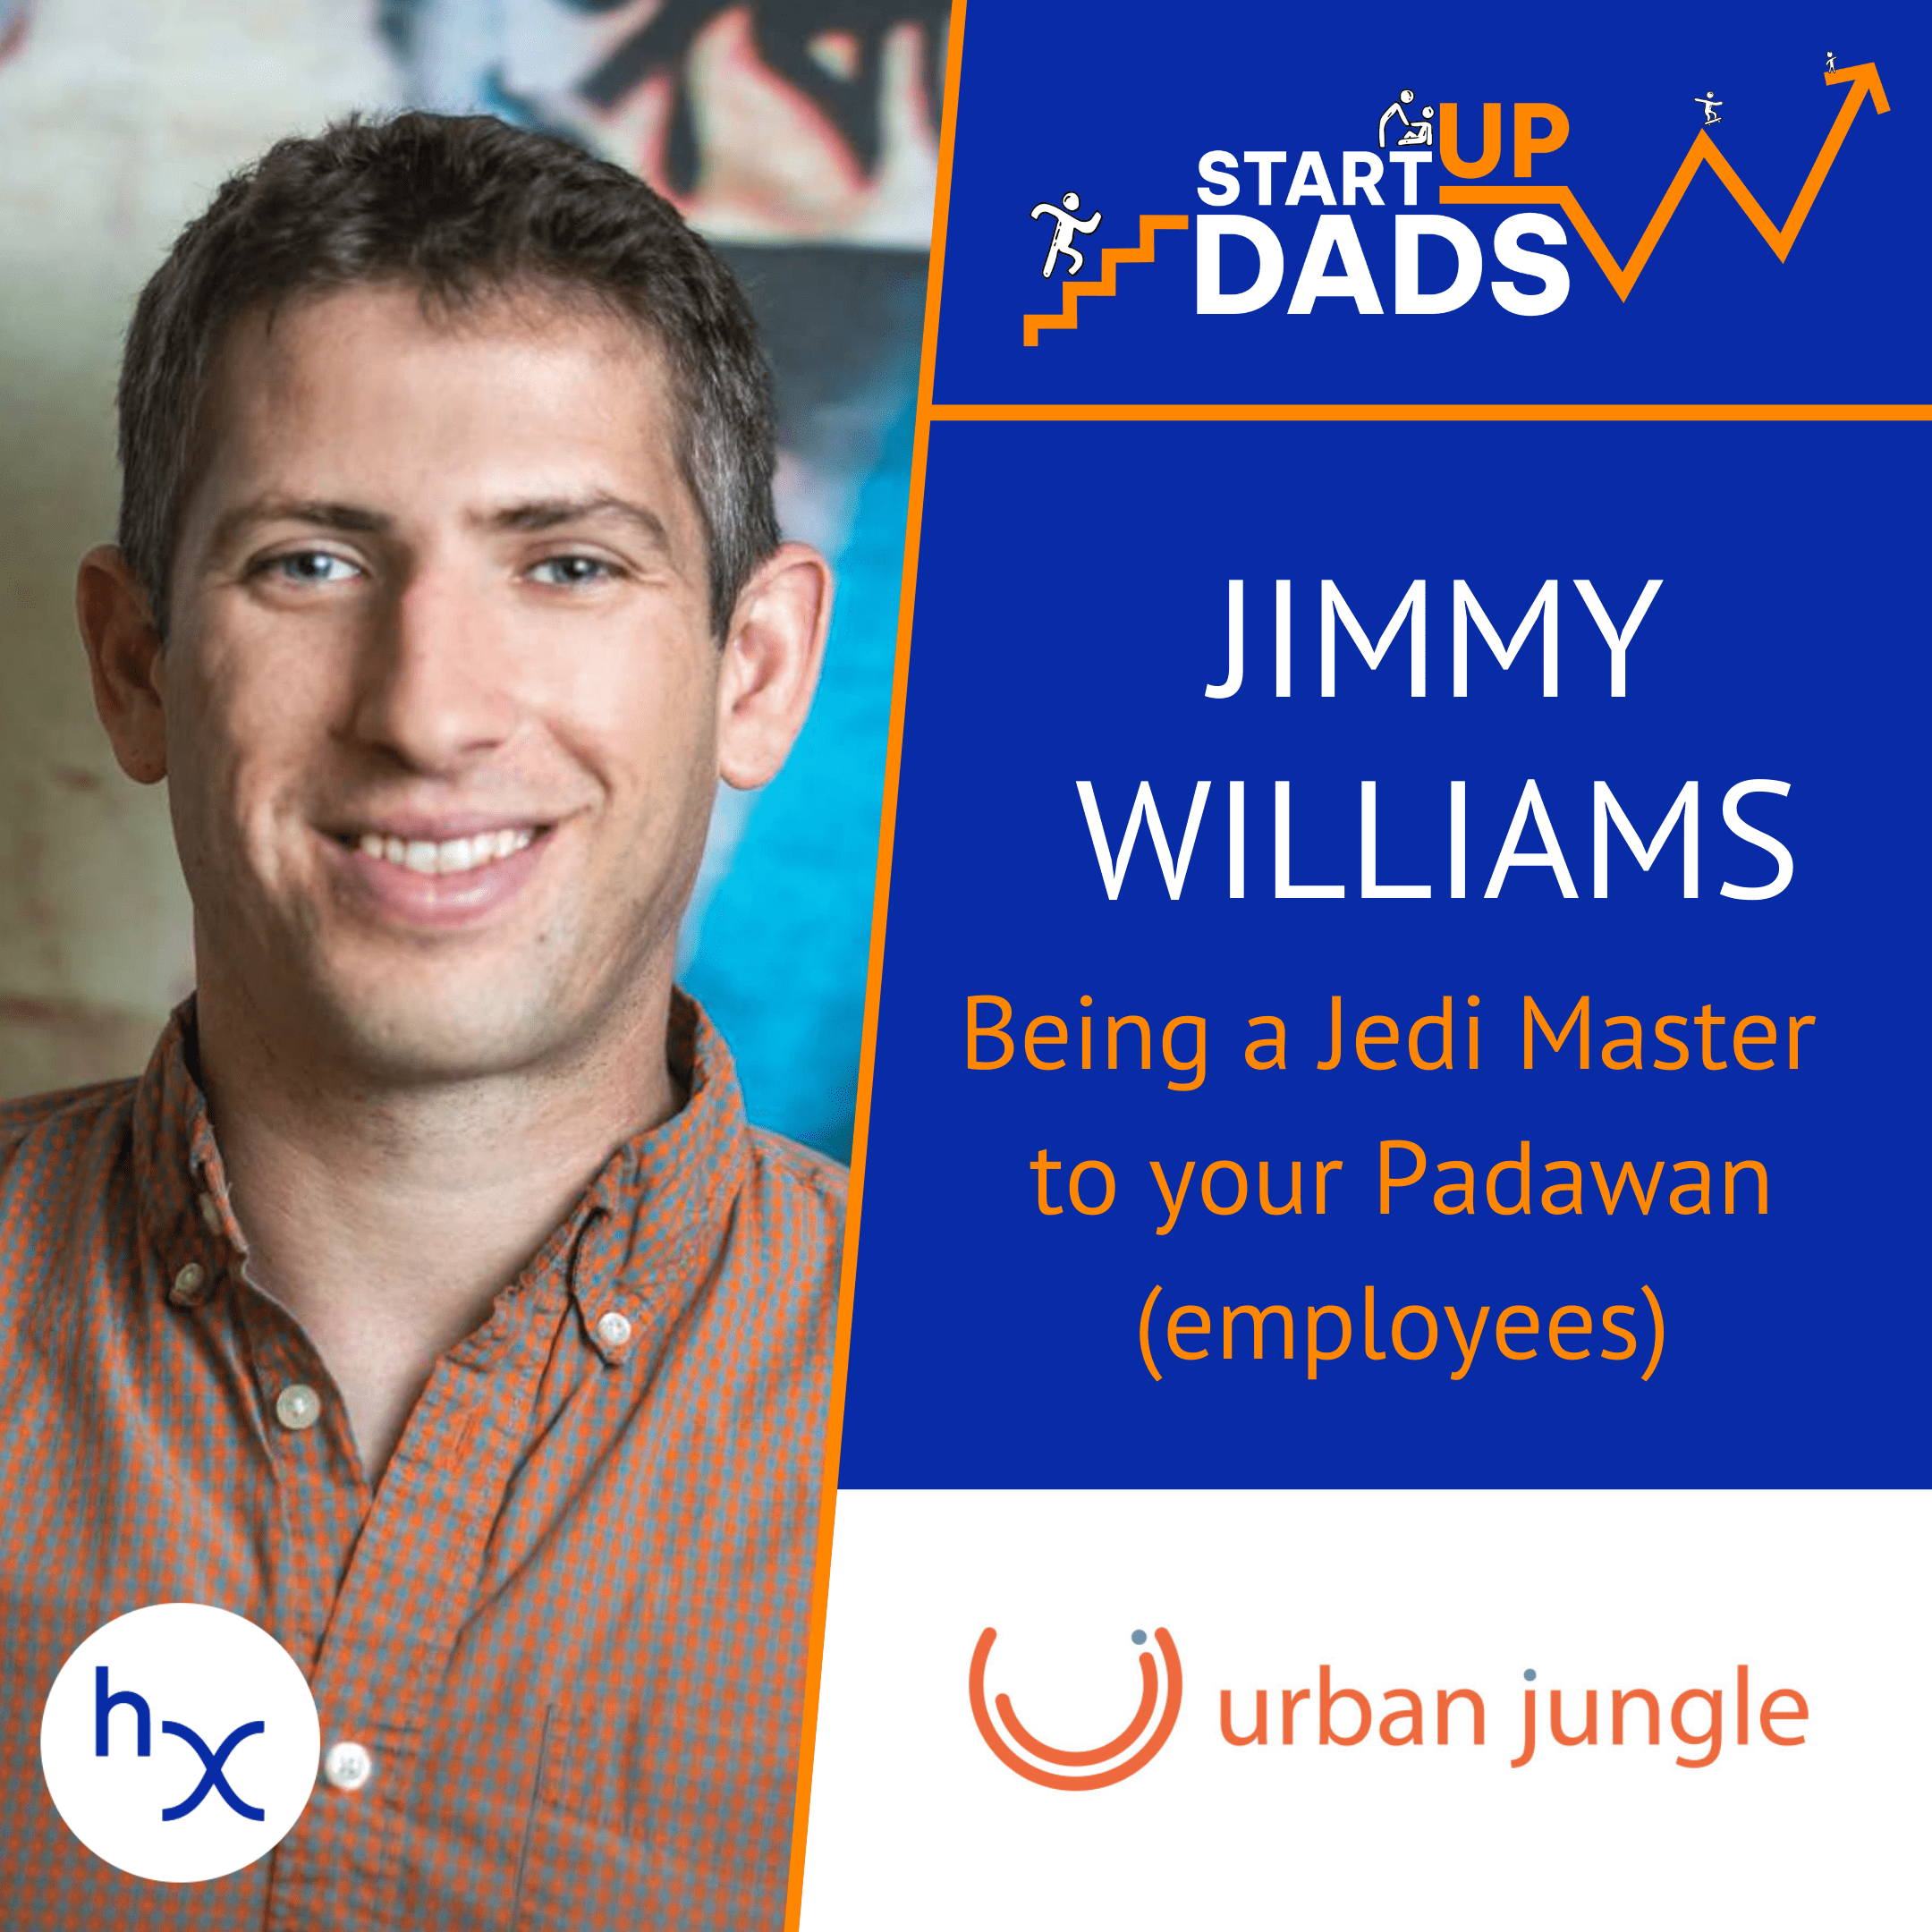 Being a Jedi Master to your Padawan (employees): Jimmy Williams, Urban Jungle